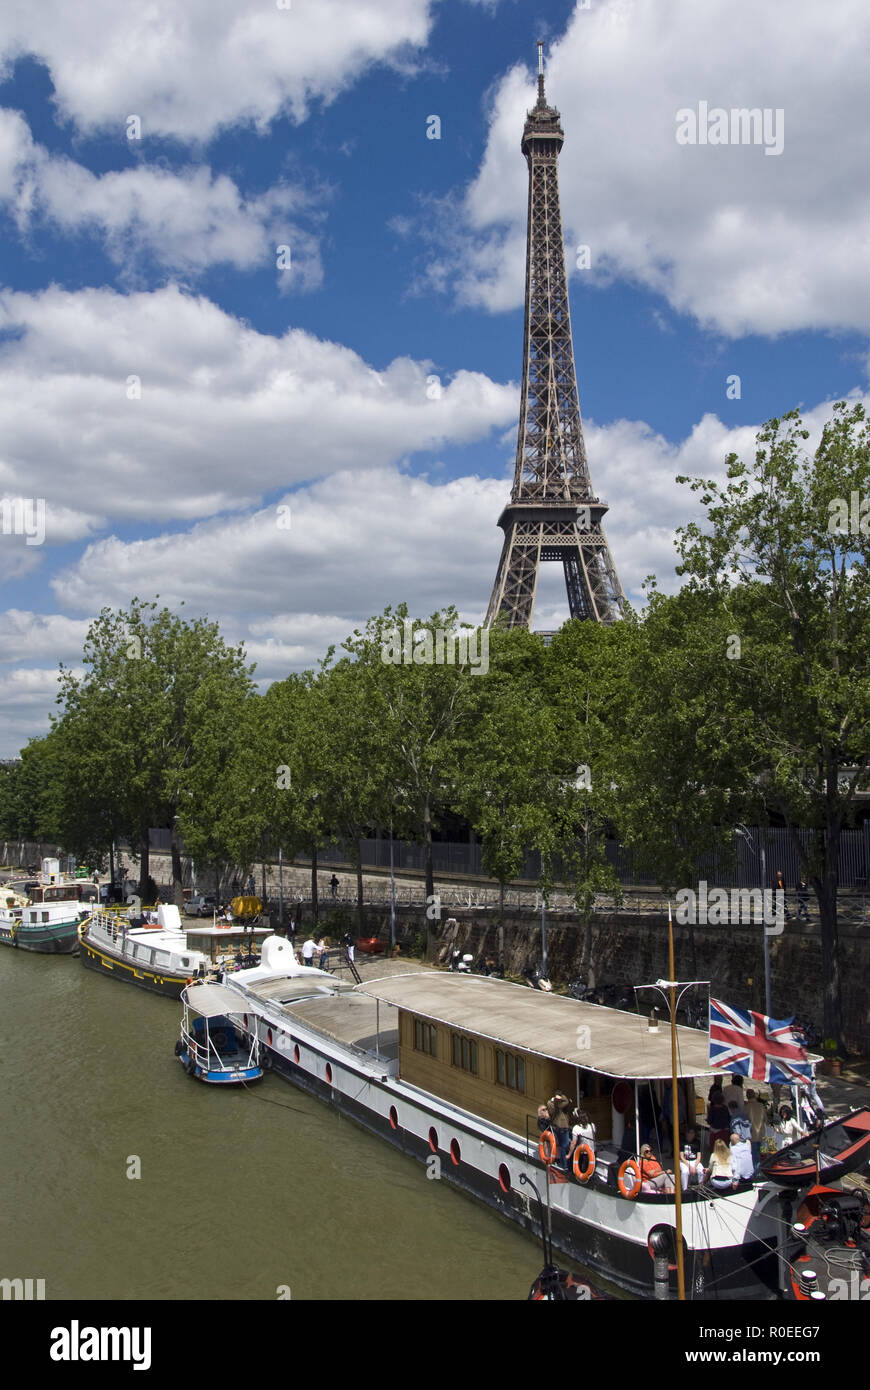 The Eiffel Tower (La Tour Eiffel) stands over boats moored on the Seine, Paris, France. Stock Photo